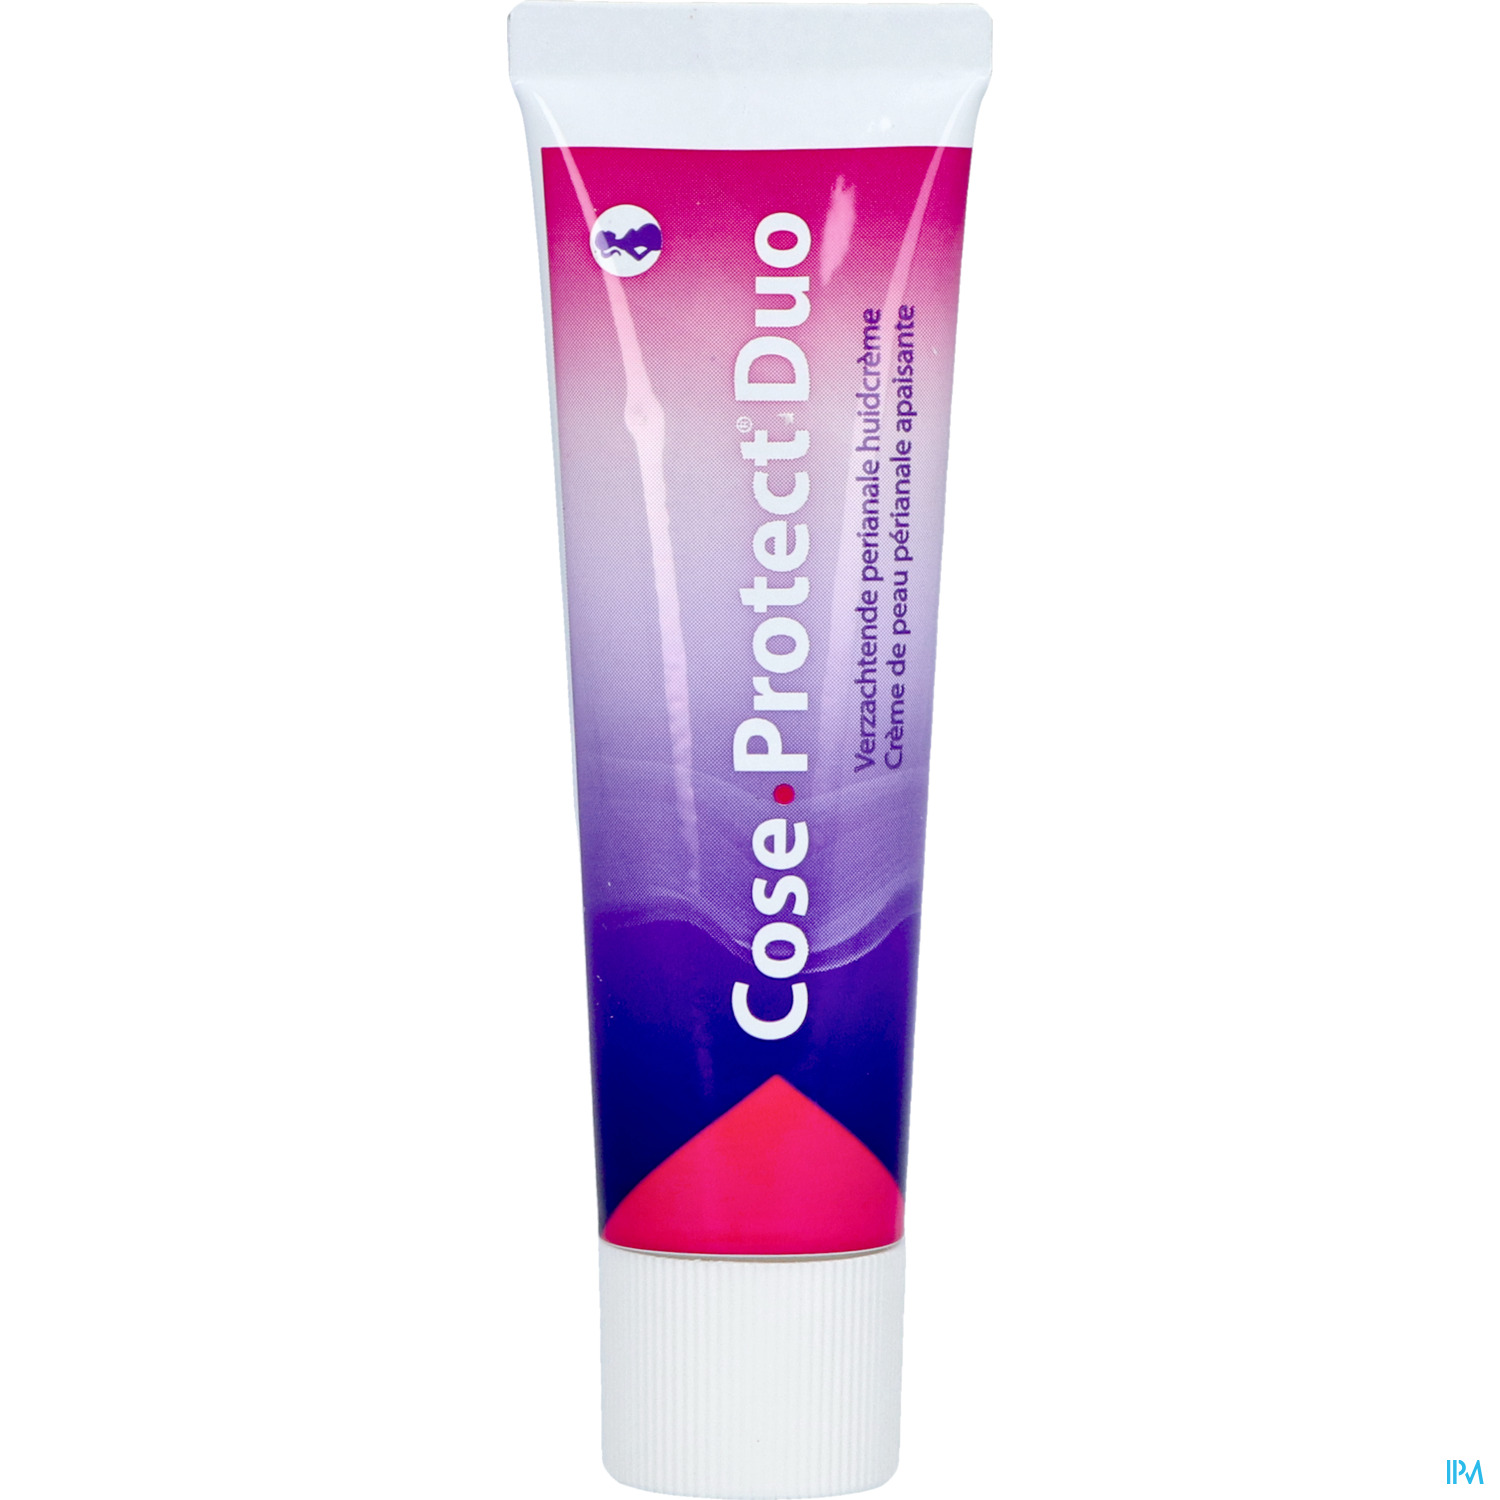 Cose Protect Duo Creme Tube 20g